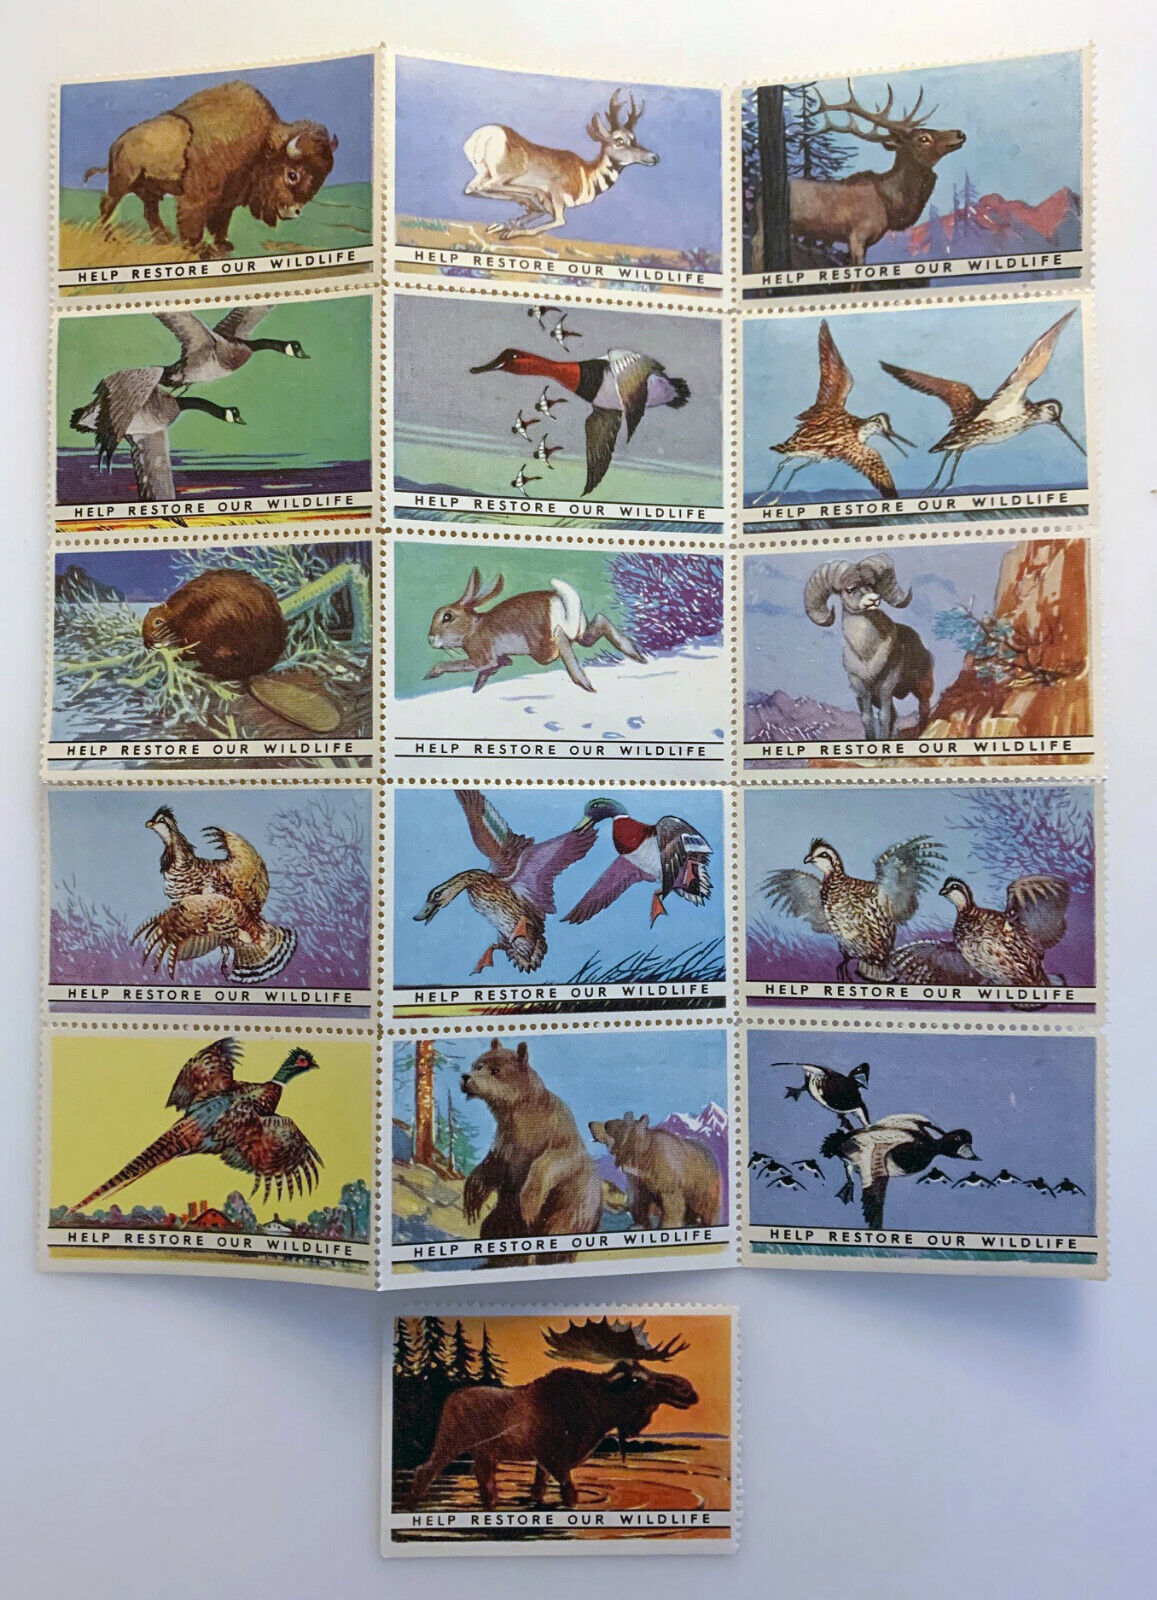 LOT (16) NATIONAL WILDLIFE FEDERATION STAMPS (1938) "HELP RESTORE OUR WILDLIFE" Без бренда